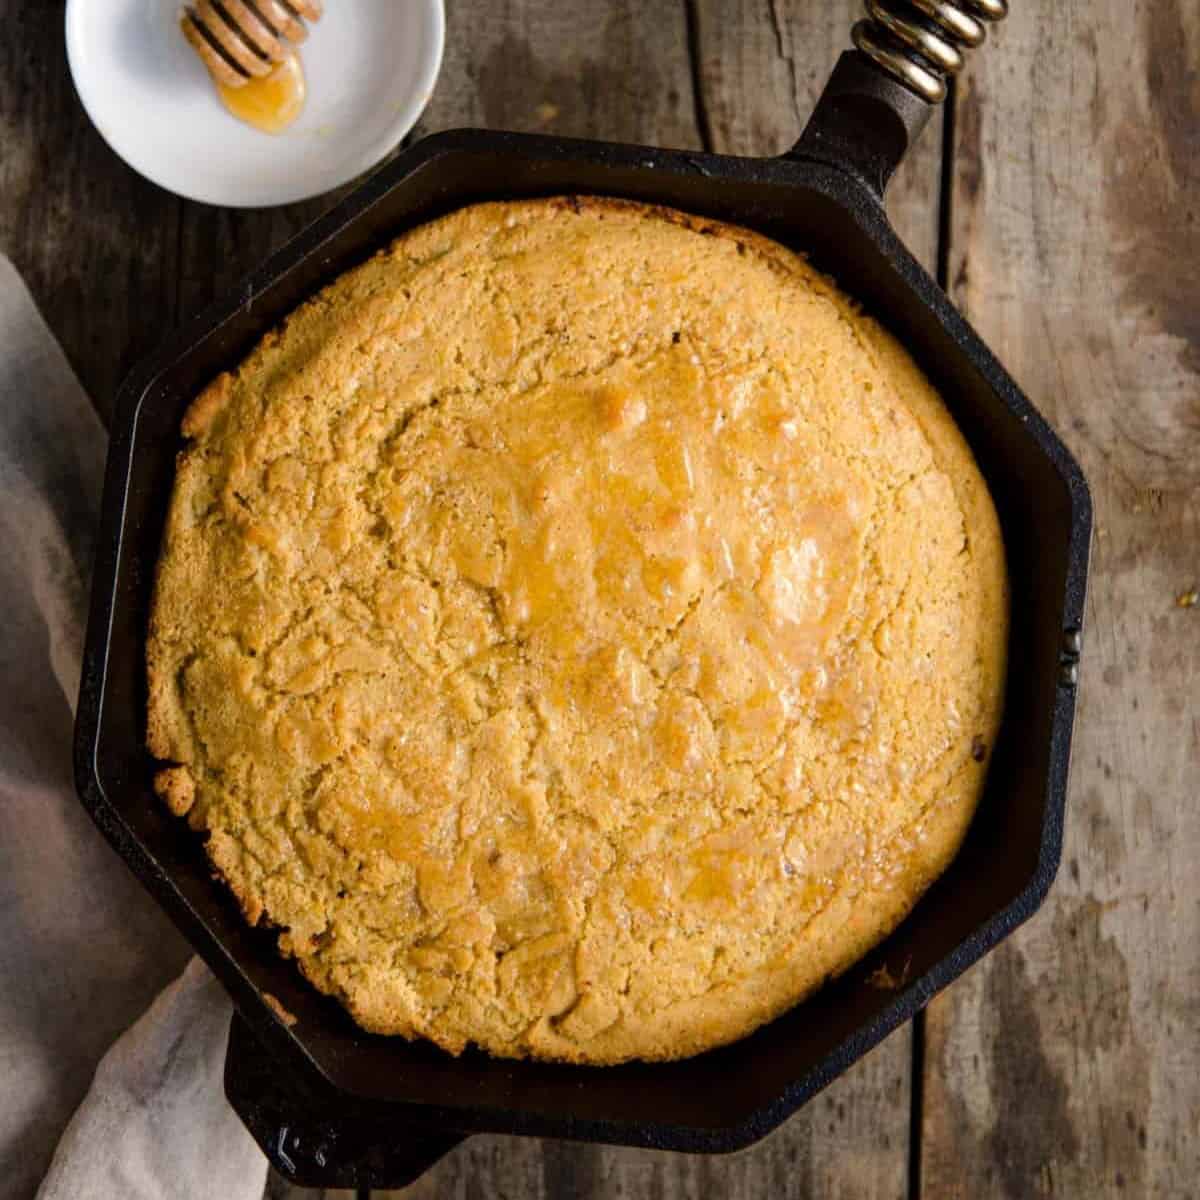 https://www.vindulge.com/wp-content/uploads/2020/04/Skillet-Cornbread-with-Smoked-Honey-cooked-on-the-grill-sq.jpg